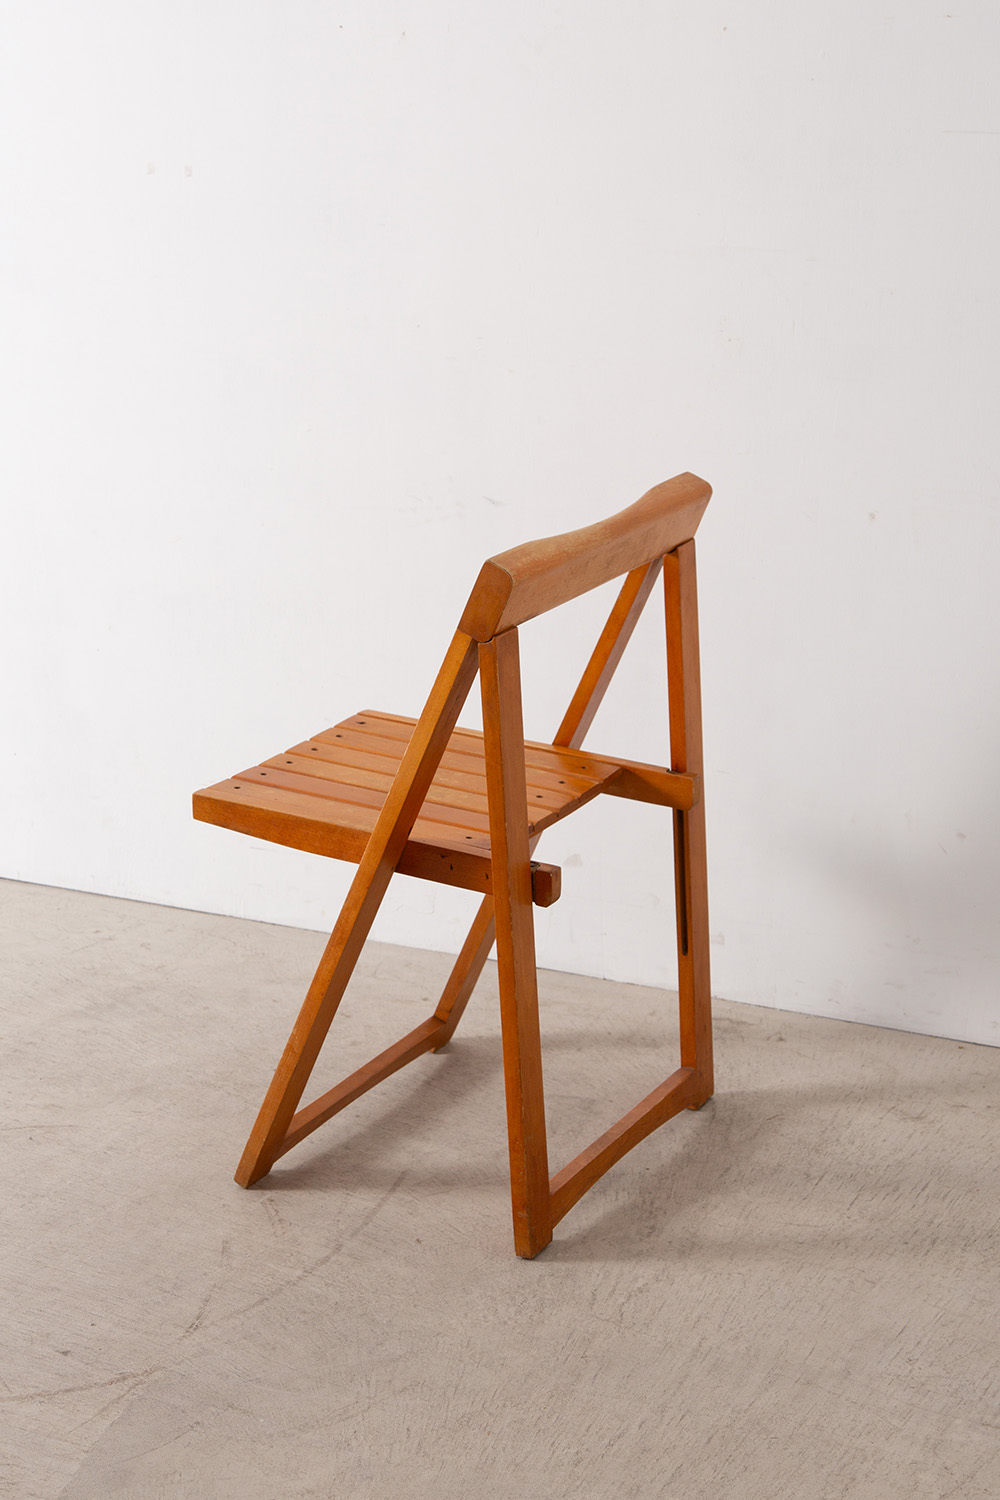 stoop | Folding Chair by Aldo Jacober for Alberto Bazzani in Pine